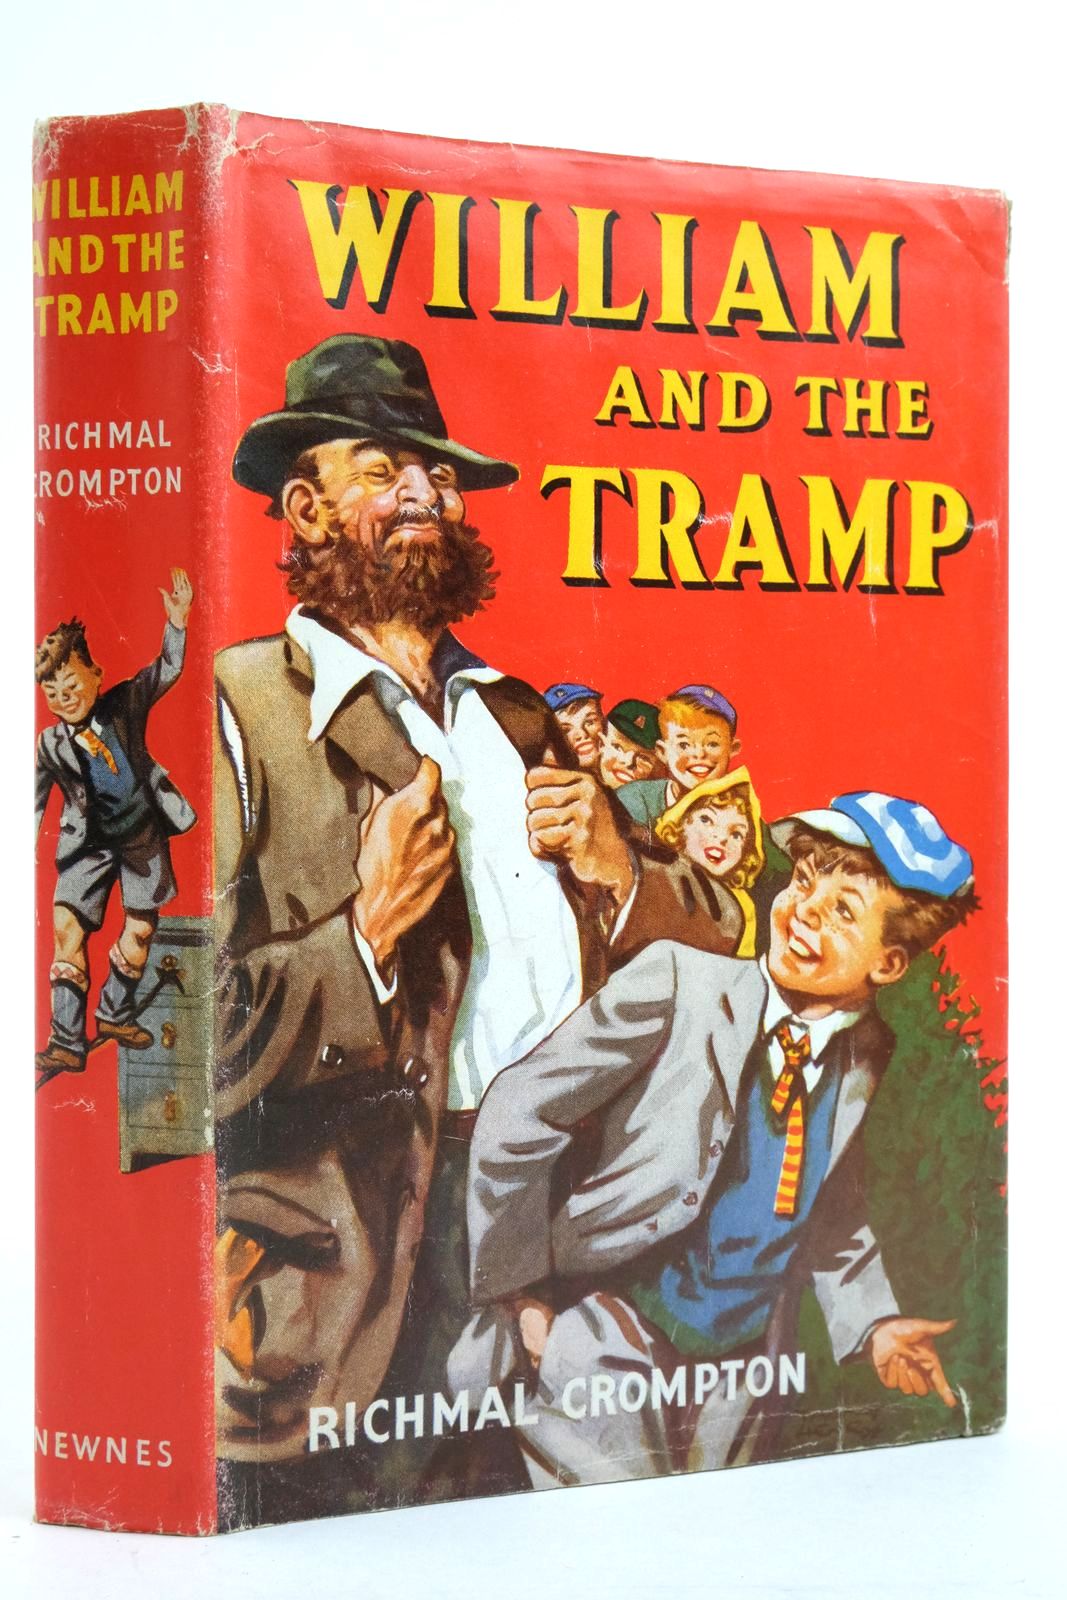 Photo of WILLIAM AND THE TRAMP written by Crompton, Richmal illustrated by Henry, Thomas published by George Newnes Ltd. (STOCK CODE: 2136105)  for sale by Stella & Rose's Books